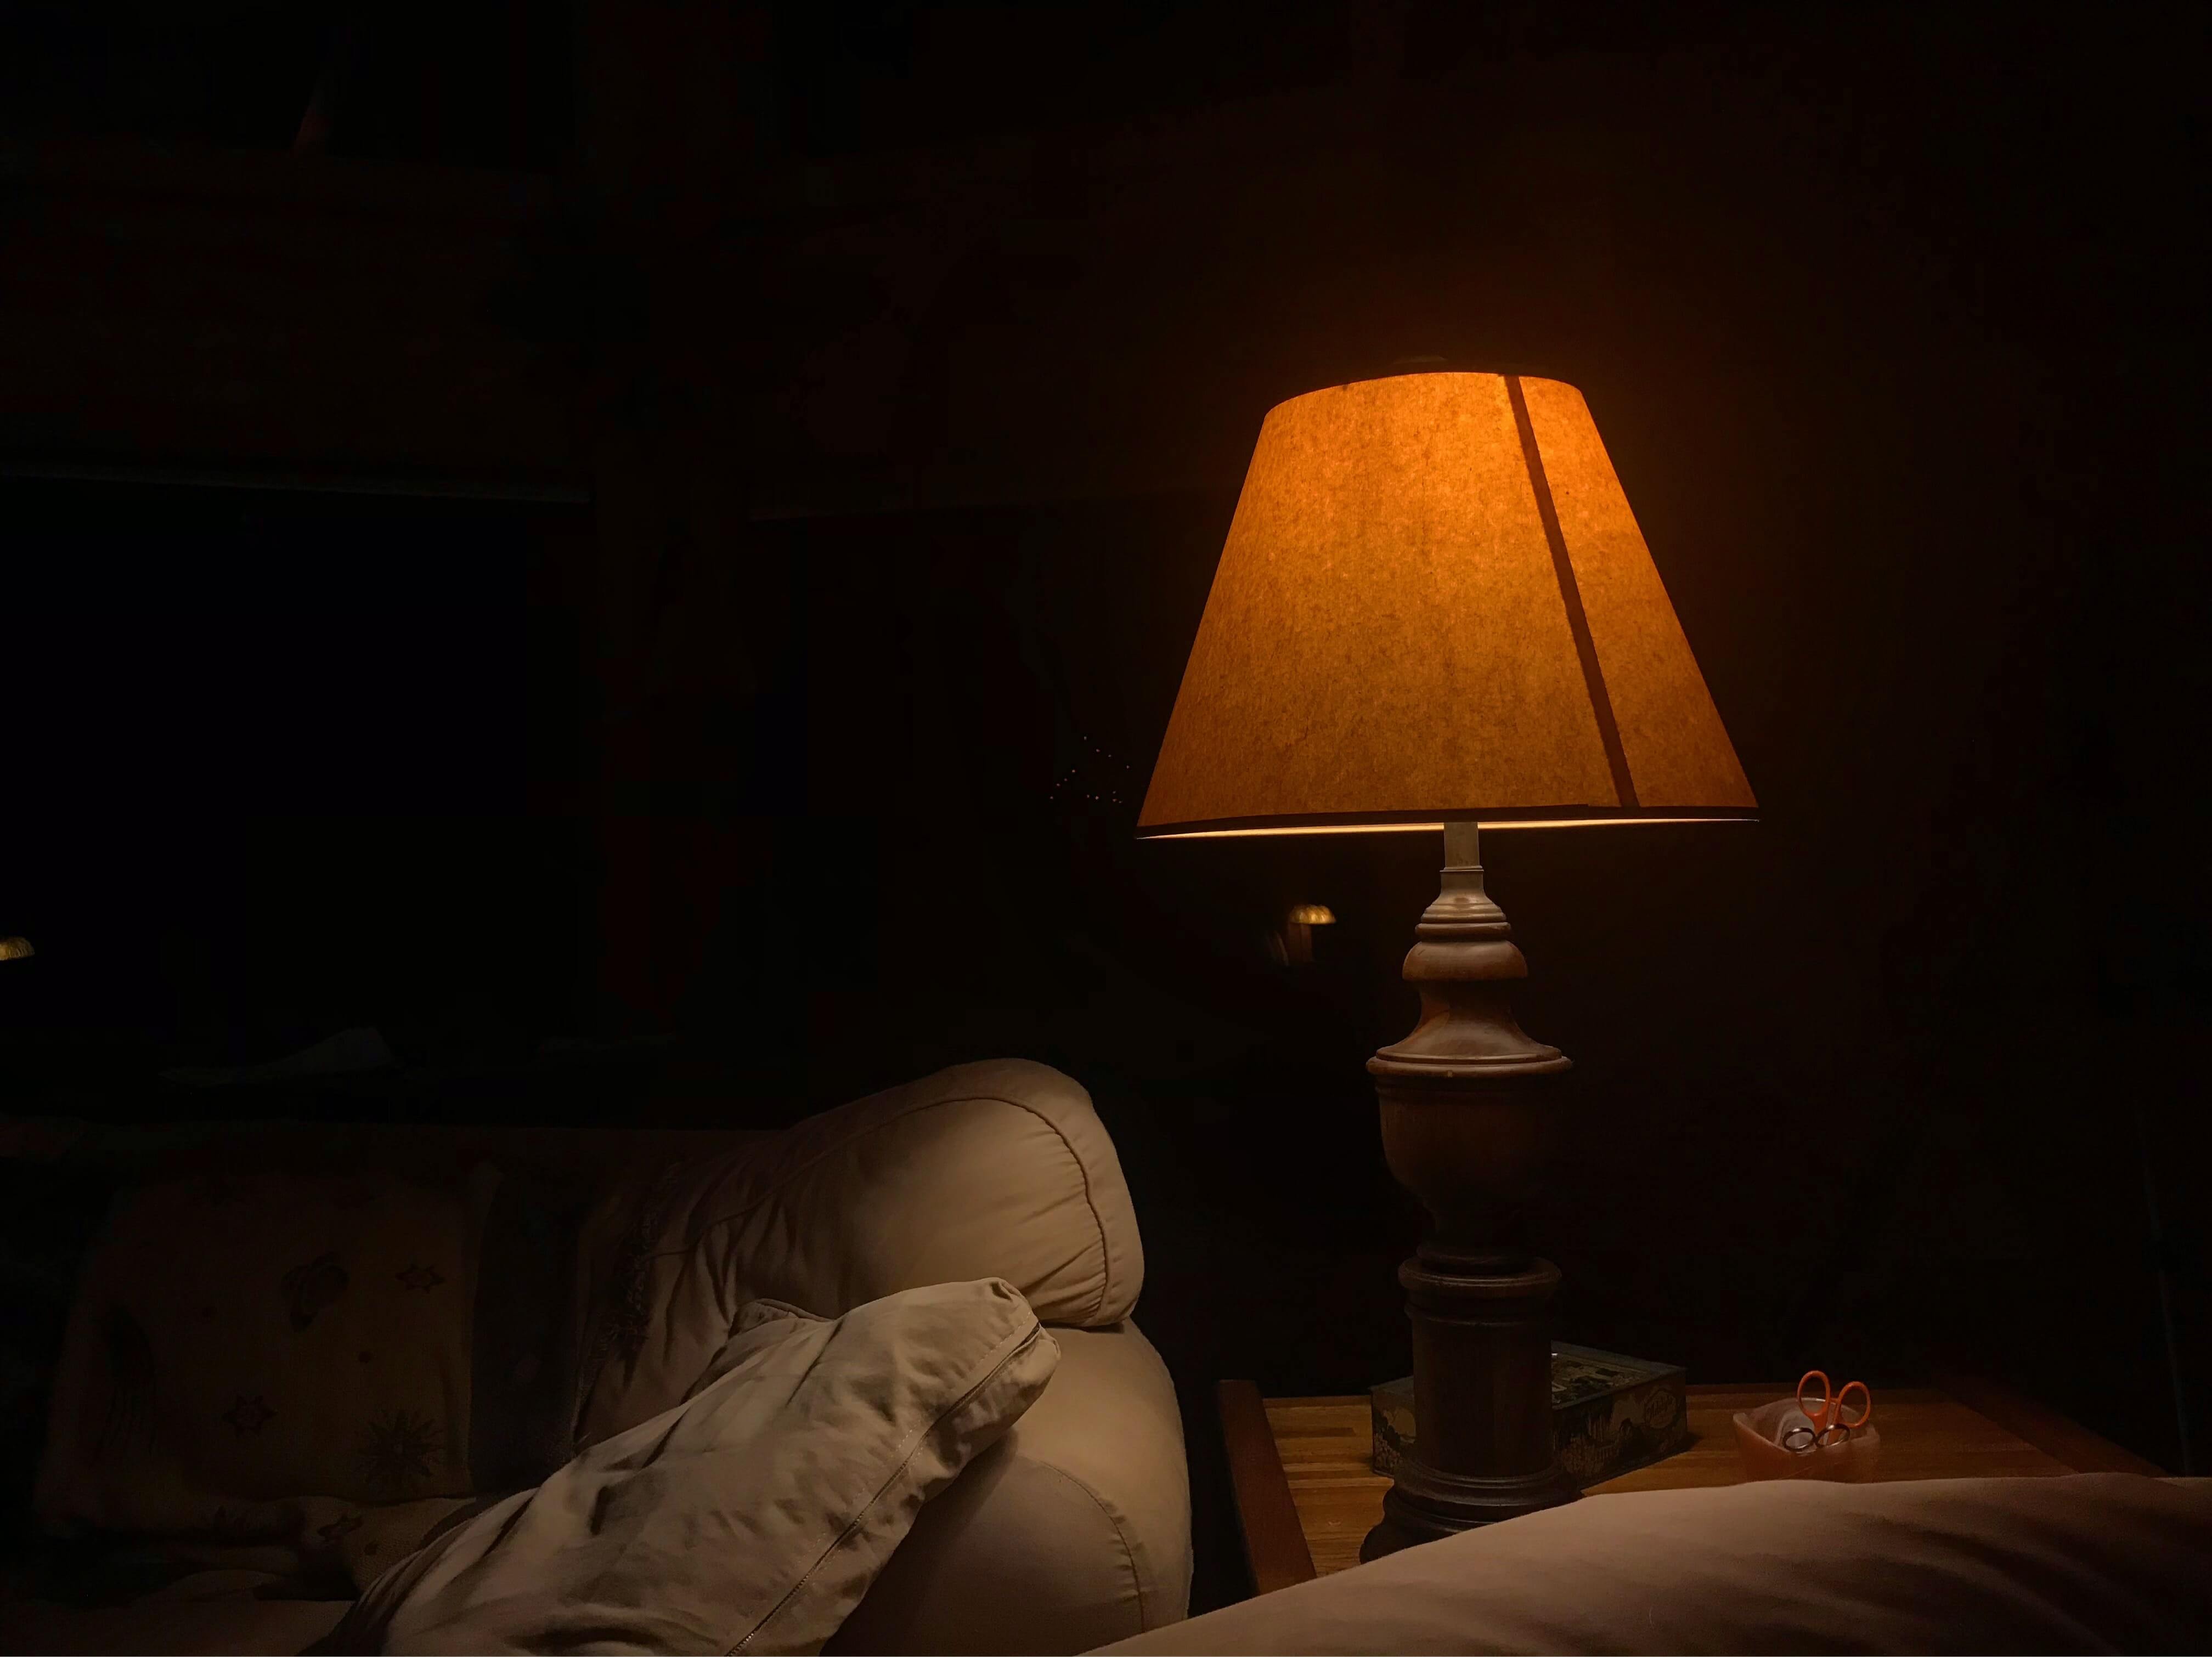 Why not to sleep with a nightlight?